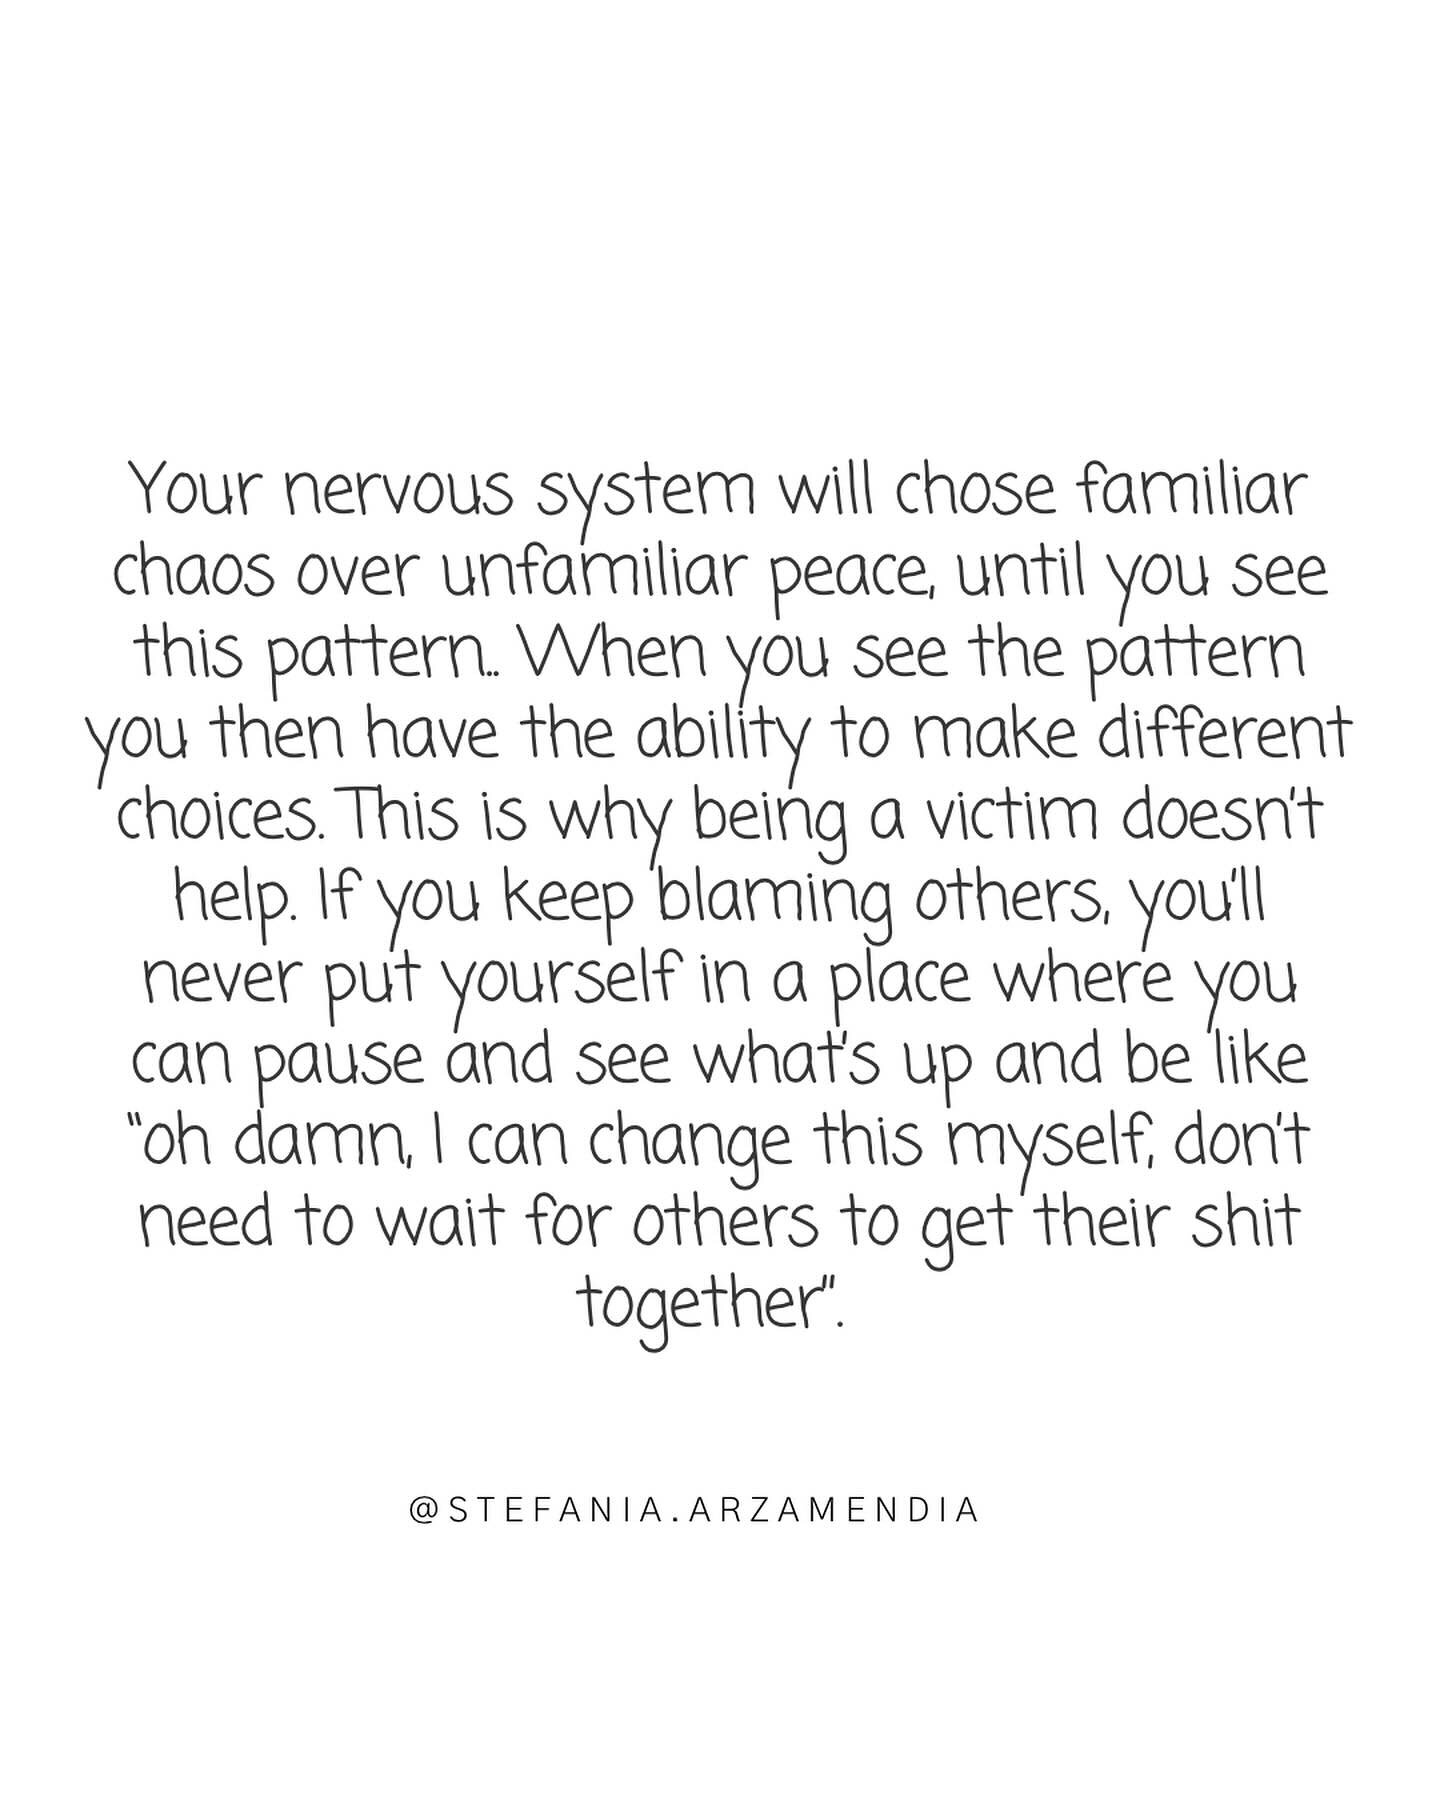 👇🏾(ESP)

Your nervous system naturally gravitates towards what it knows, even if it is chaotic, simply because it is familiar. 

Luckily, once you catch this pattern, you gain the power to make new choices. 

This is why adopting a victim mentality